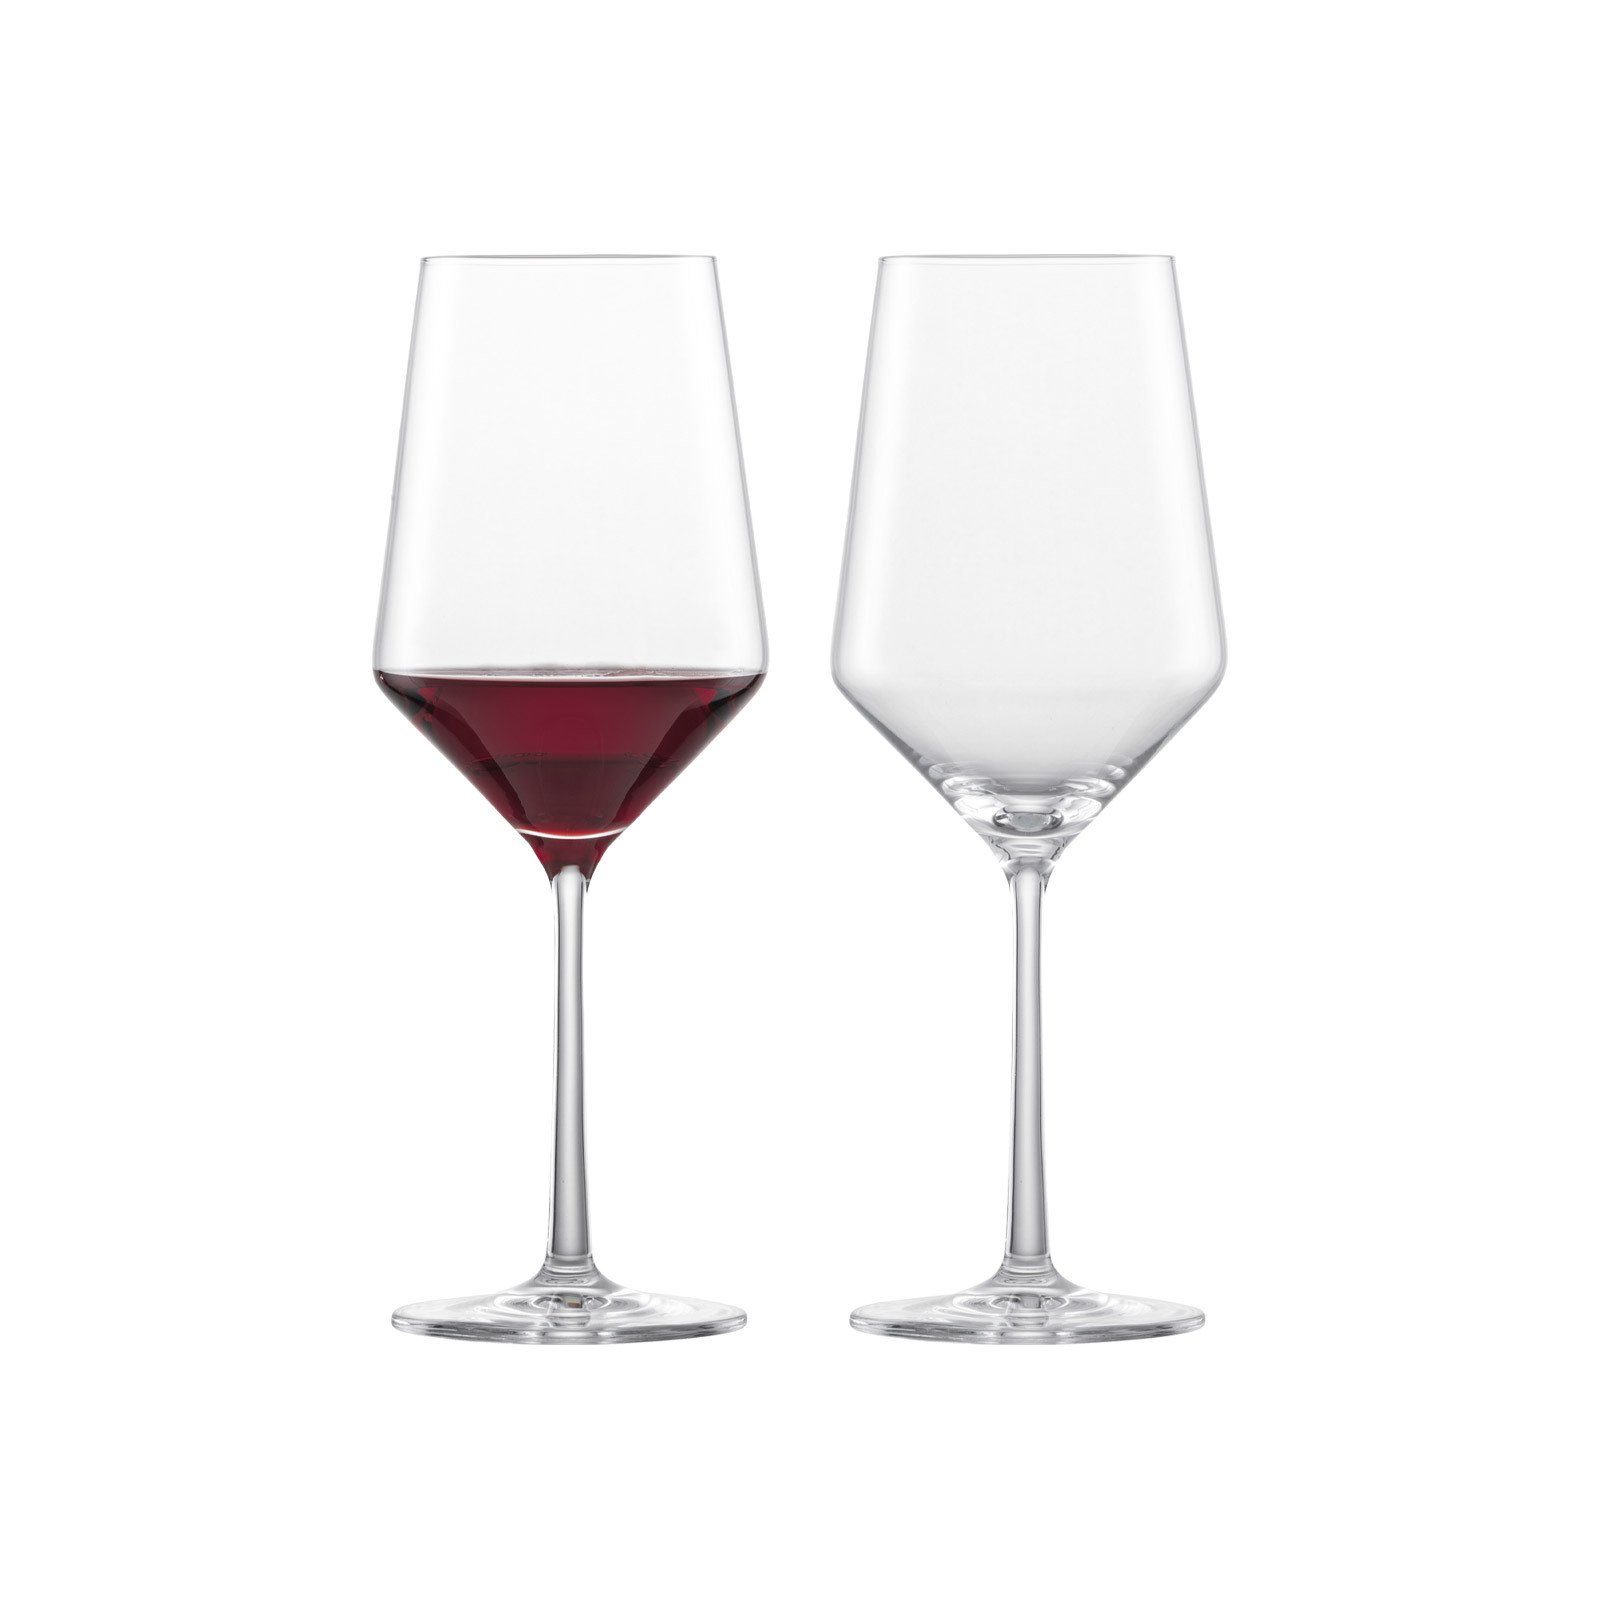 Zwiesel Glas Rotweinglas Pure Cabernet, Glas, Made in Germany